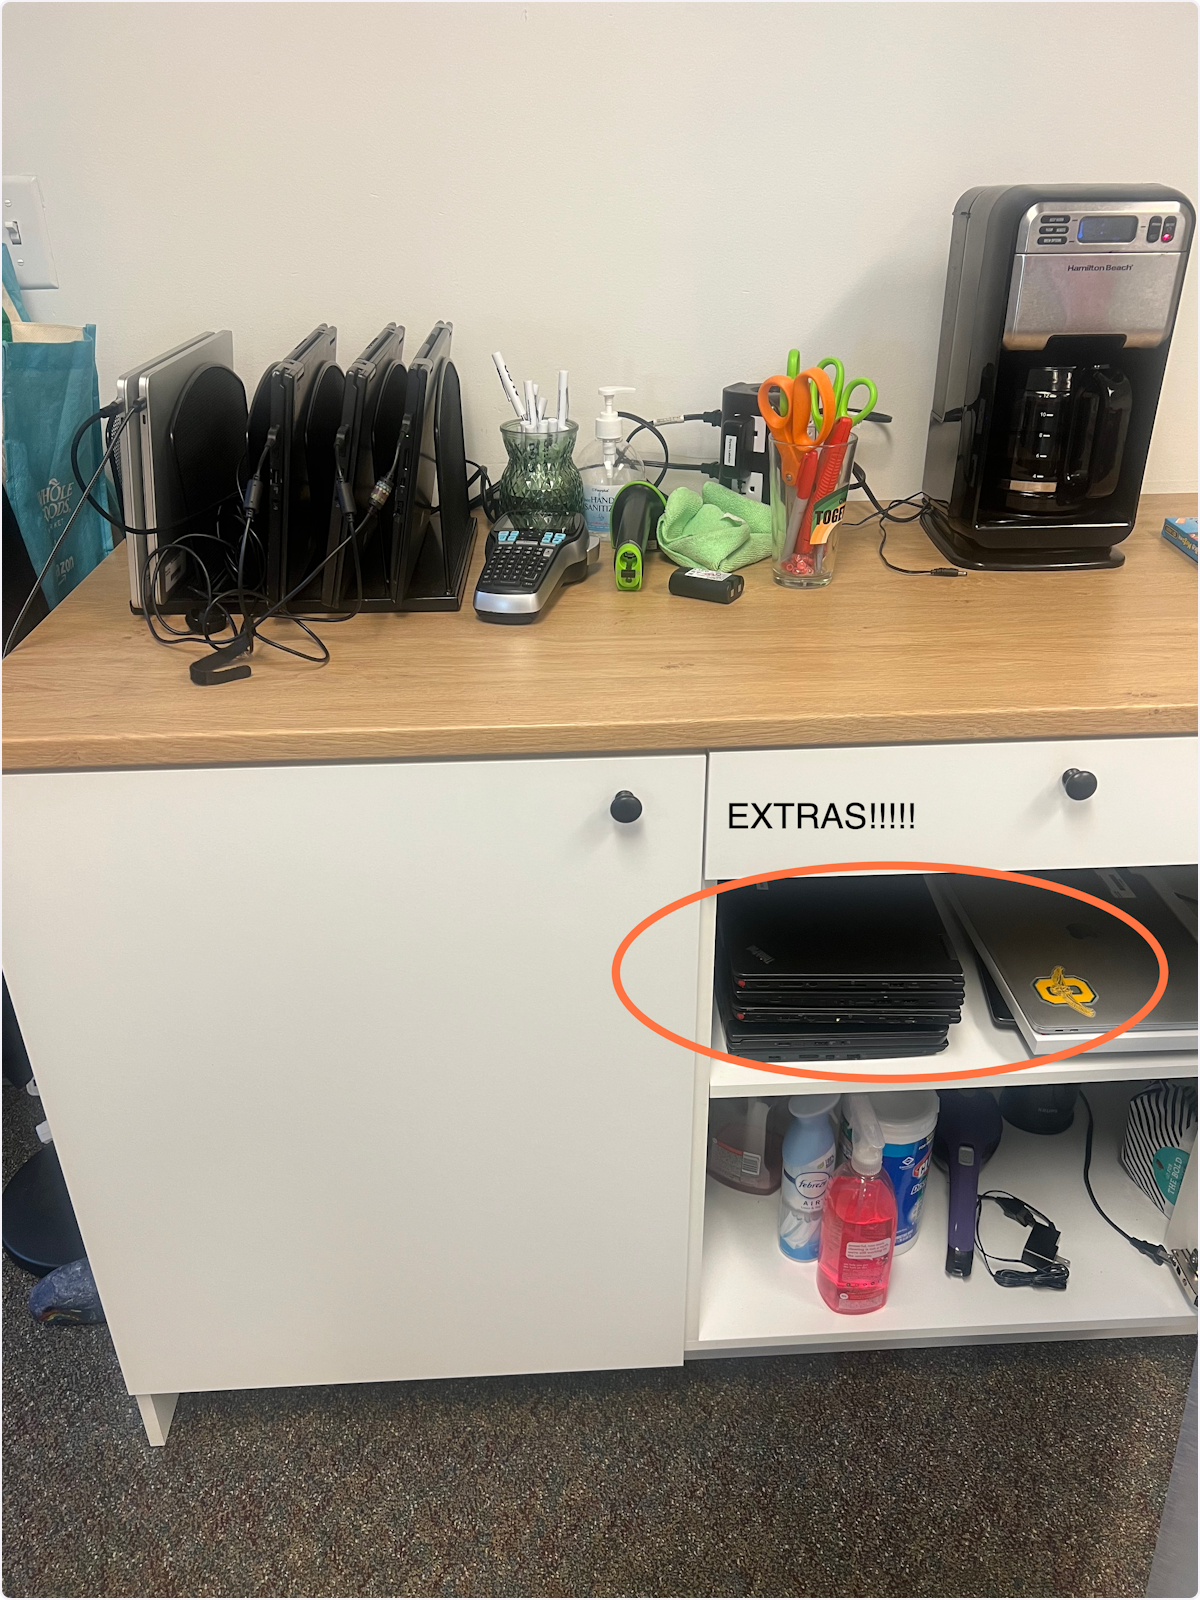 If a student asks for a loaner computer, the workbench is where you can find the computers that serve that purpose. 
They will be charging on the divider
Black Lenovo's are people who use Windows
Gray Airbook's are for people who use Apple MacOS